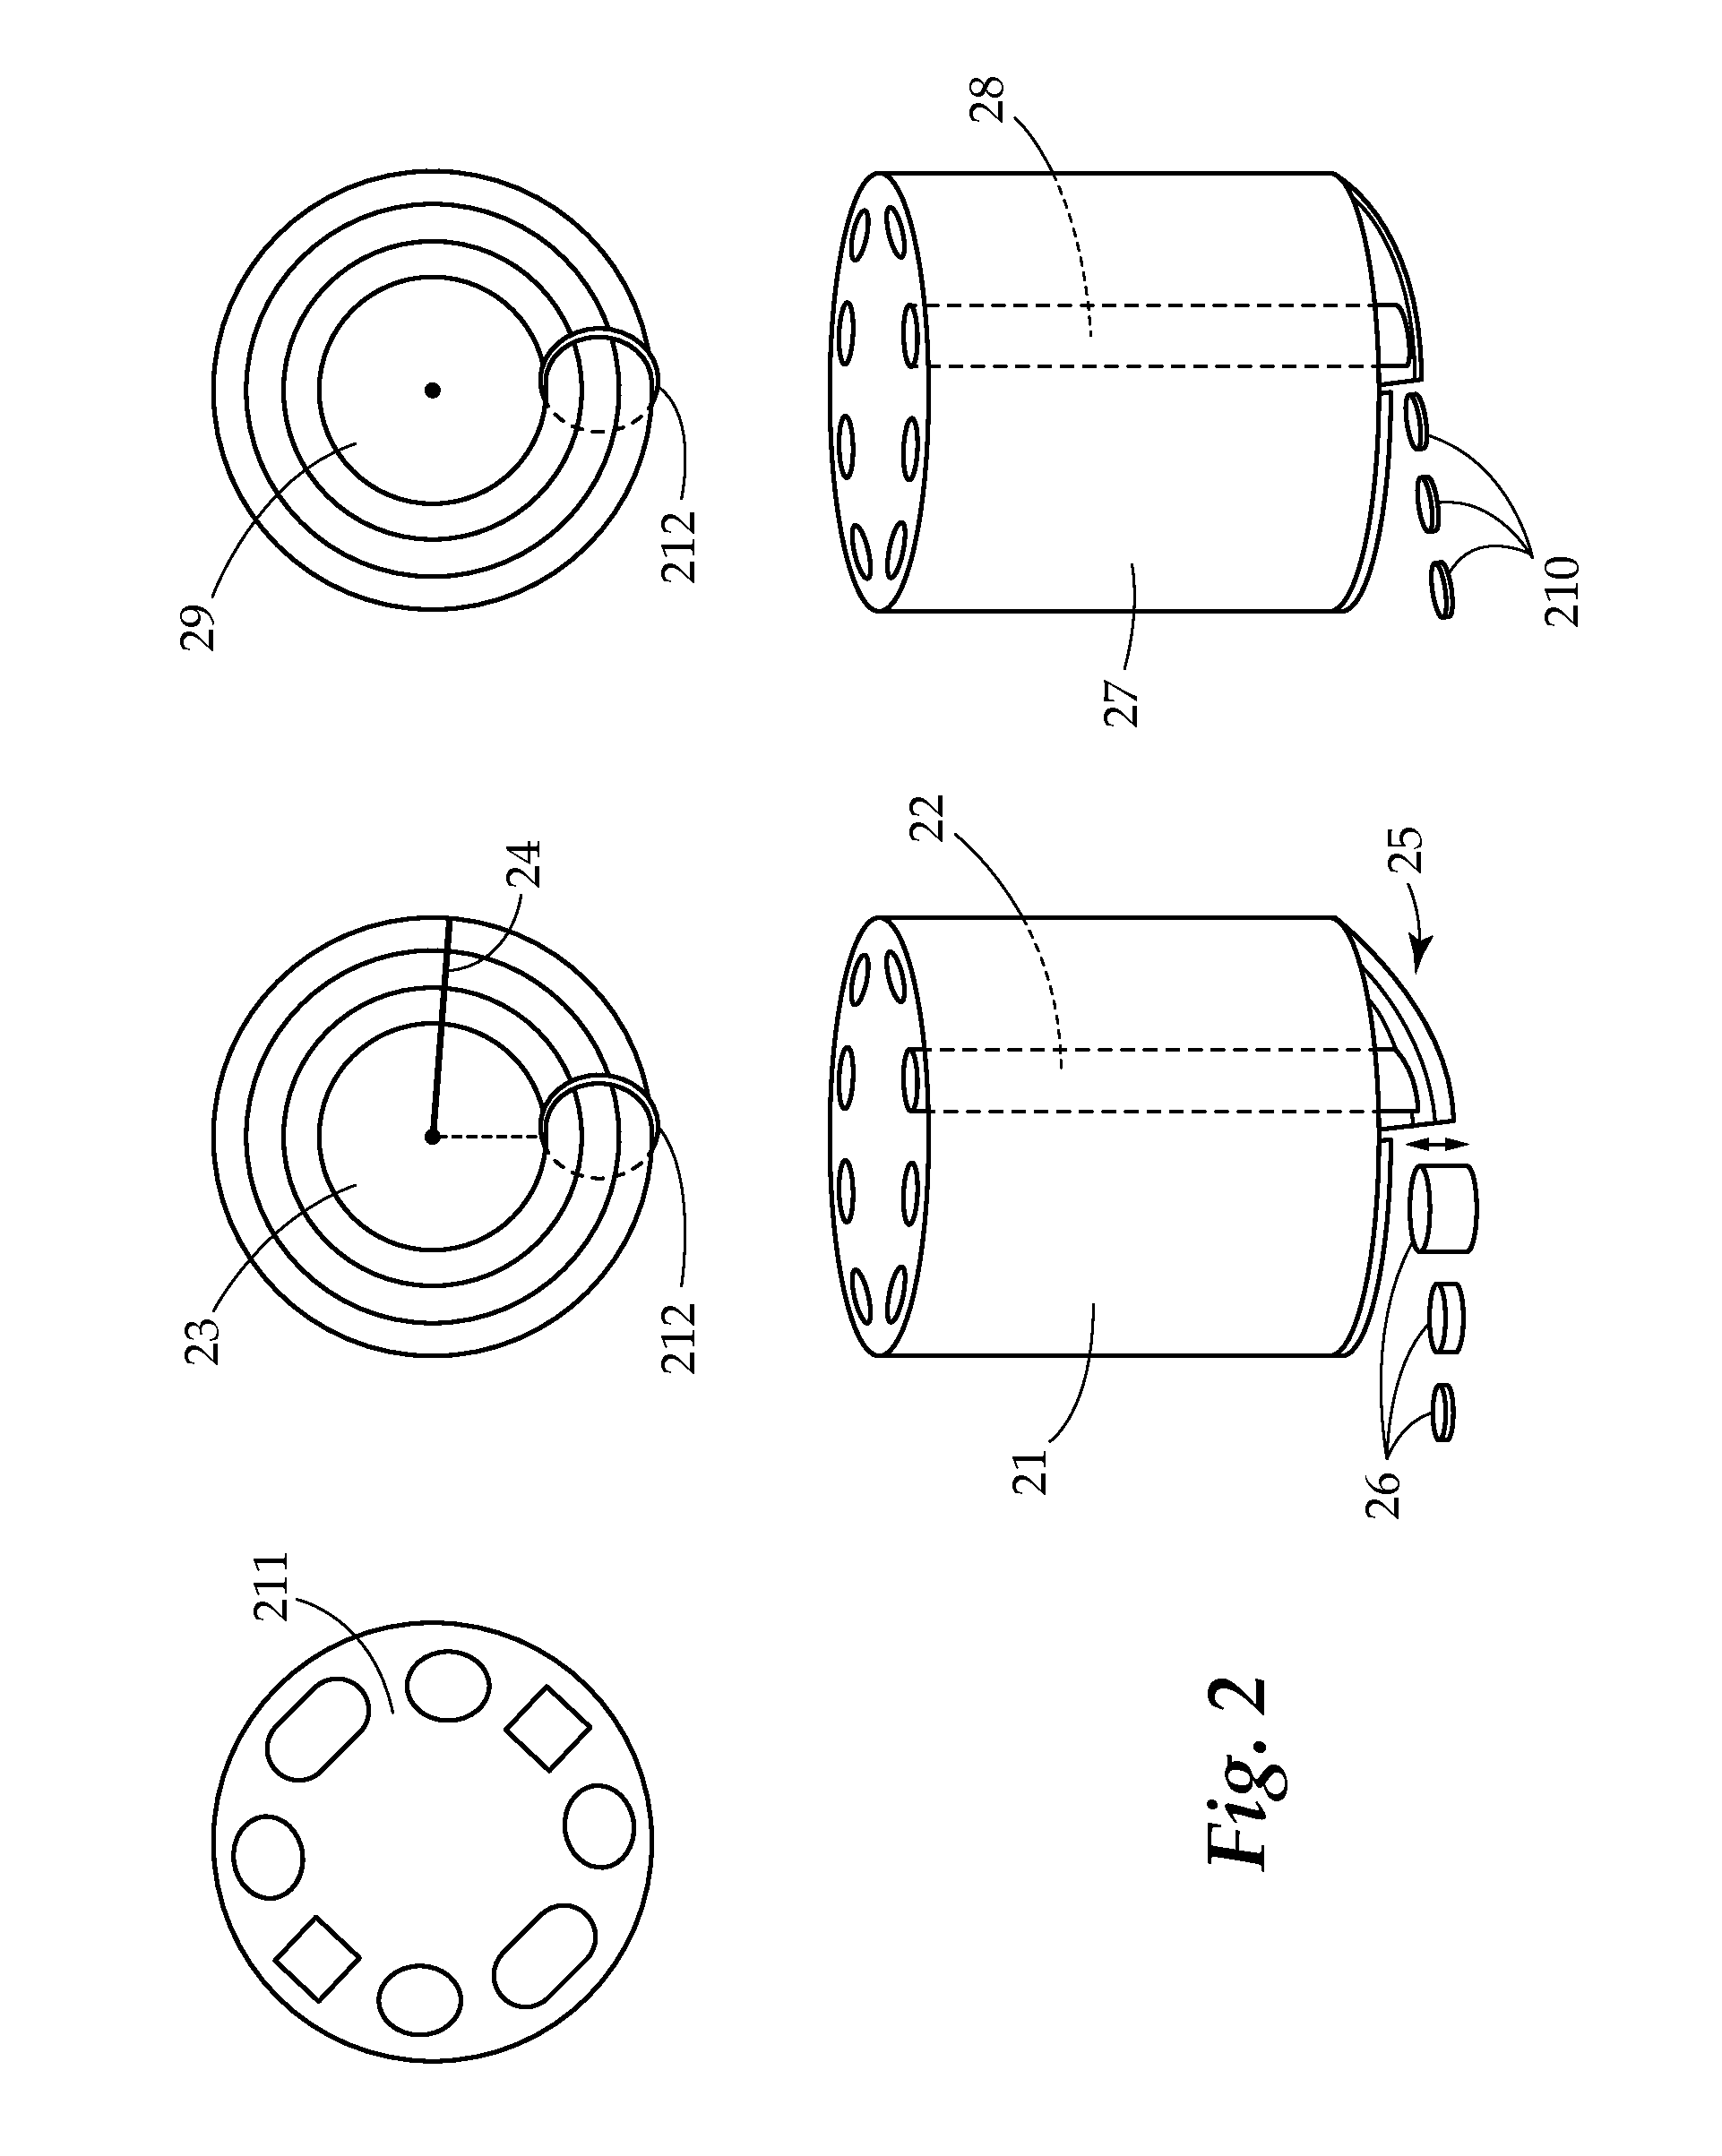 System and method for making food items